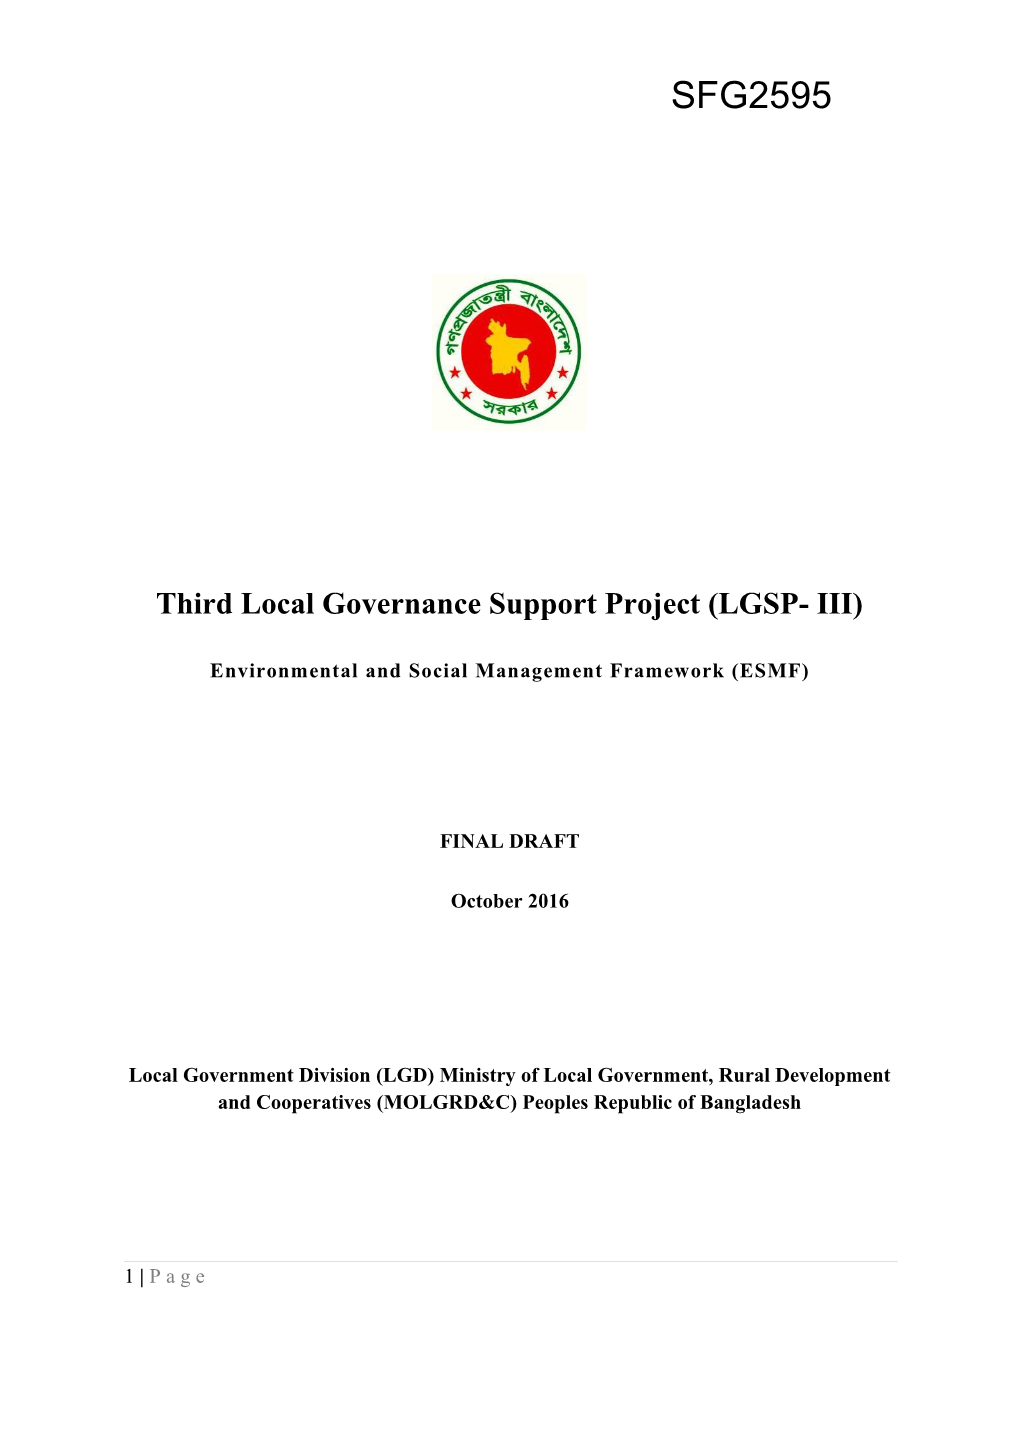 Third Local Governance Support Project (LGSP- III)